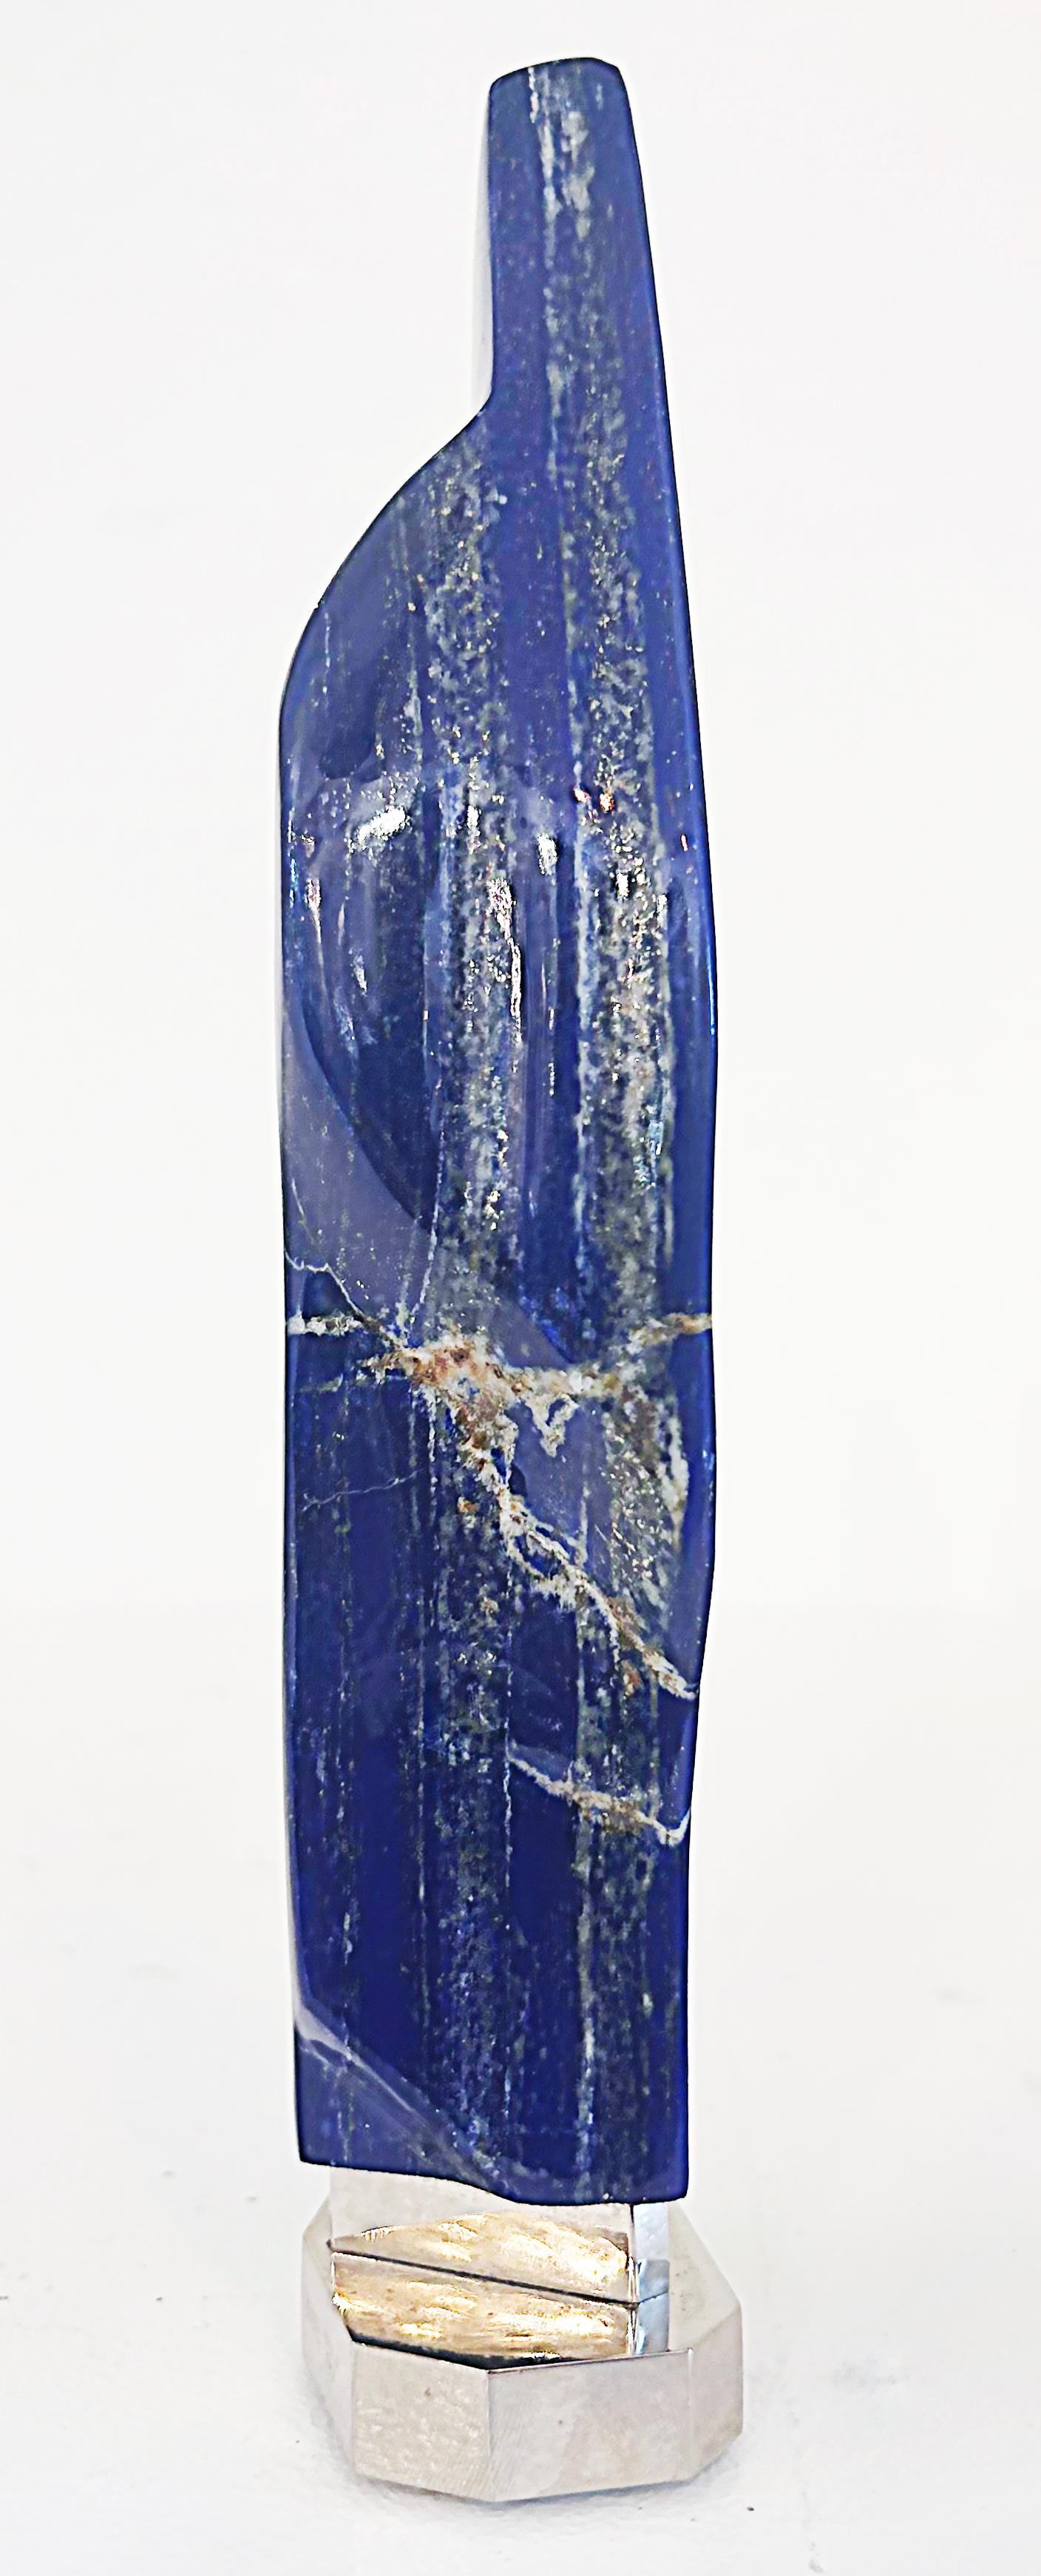 Giuliano Tincani Lapis Lazuli Specimen Sculpture on Nickel Plated Brass Base

Offered for sale is a one-of-a-kind large Lapis Lazuli specimen that was searched for and selected by Giuliano Tincani for its individual characteristics. Tincani then